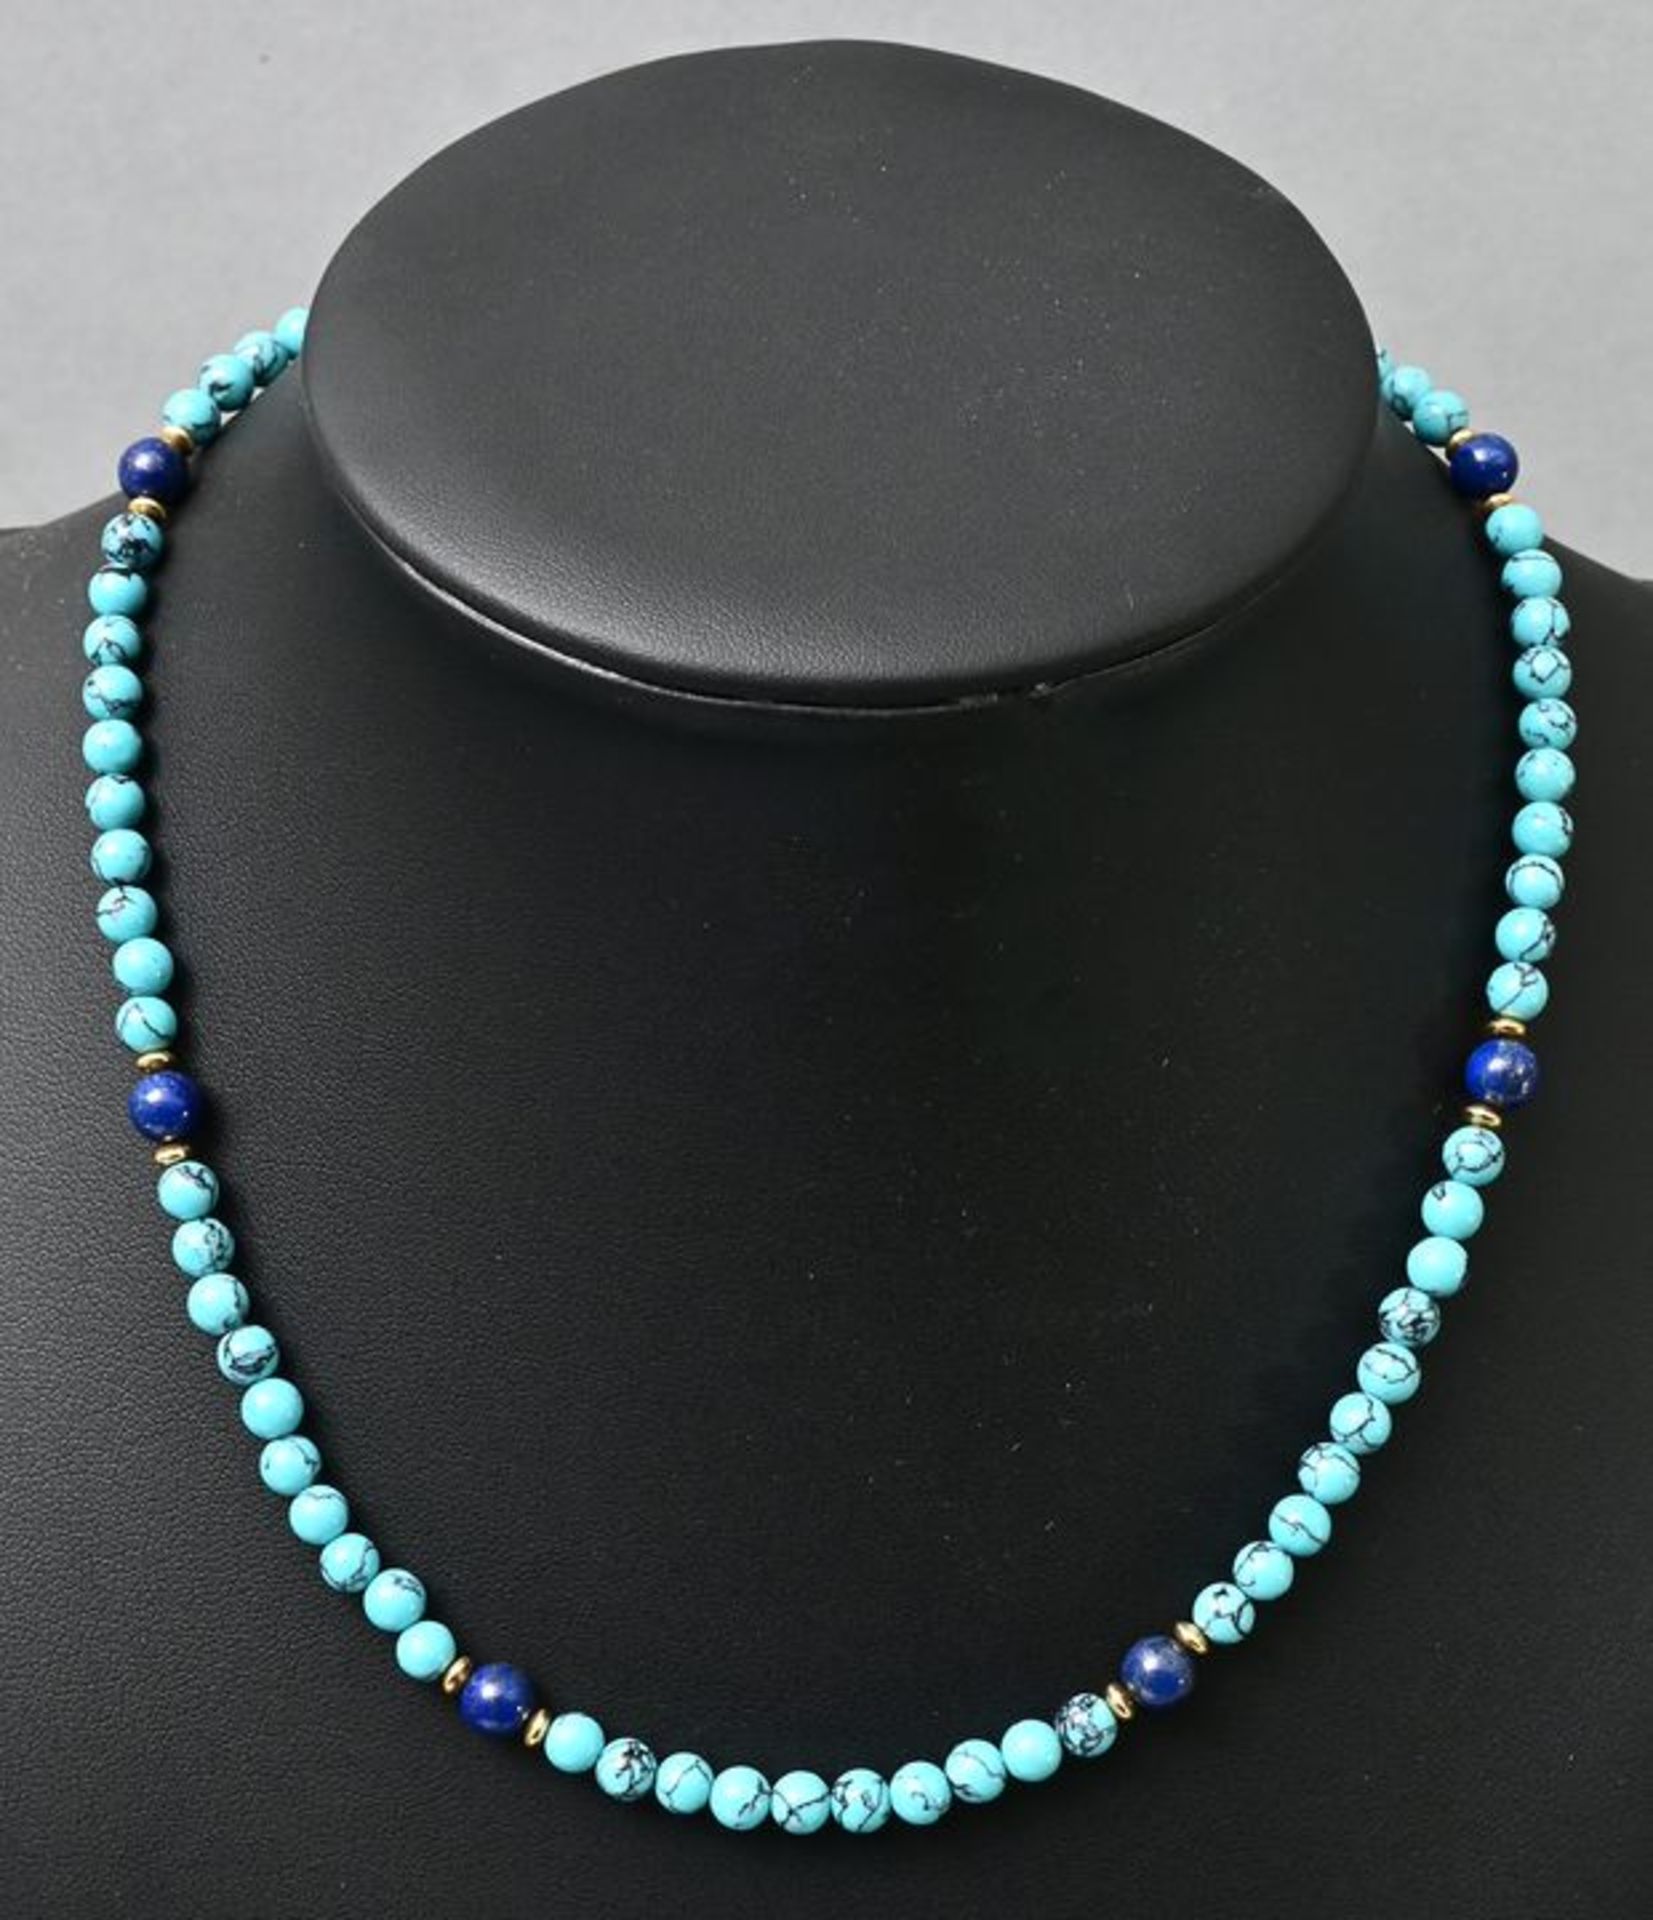 Türkis-Kette/ turquoise necklace